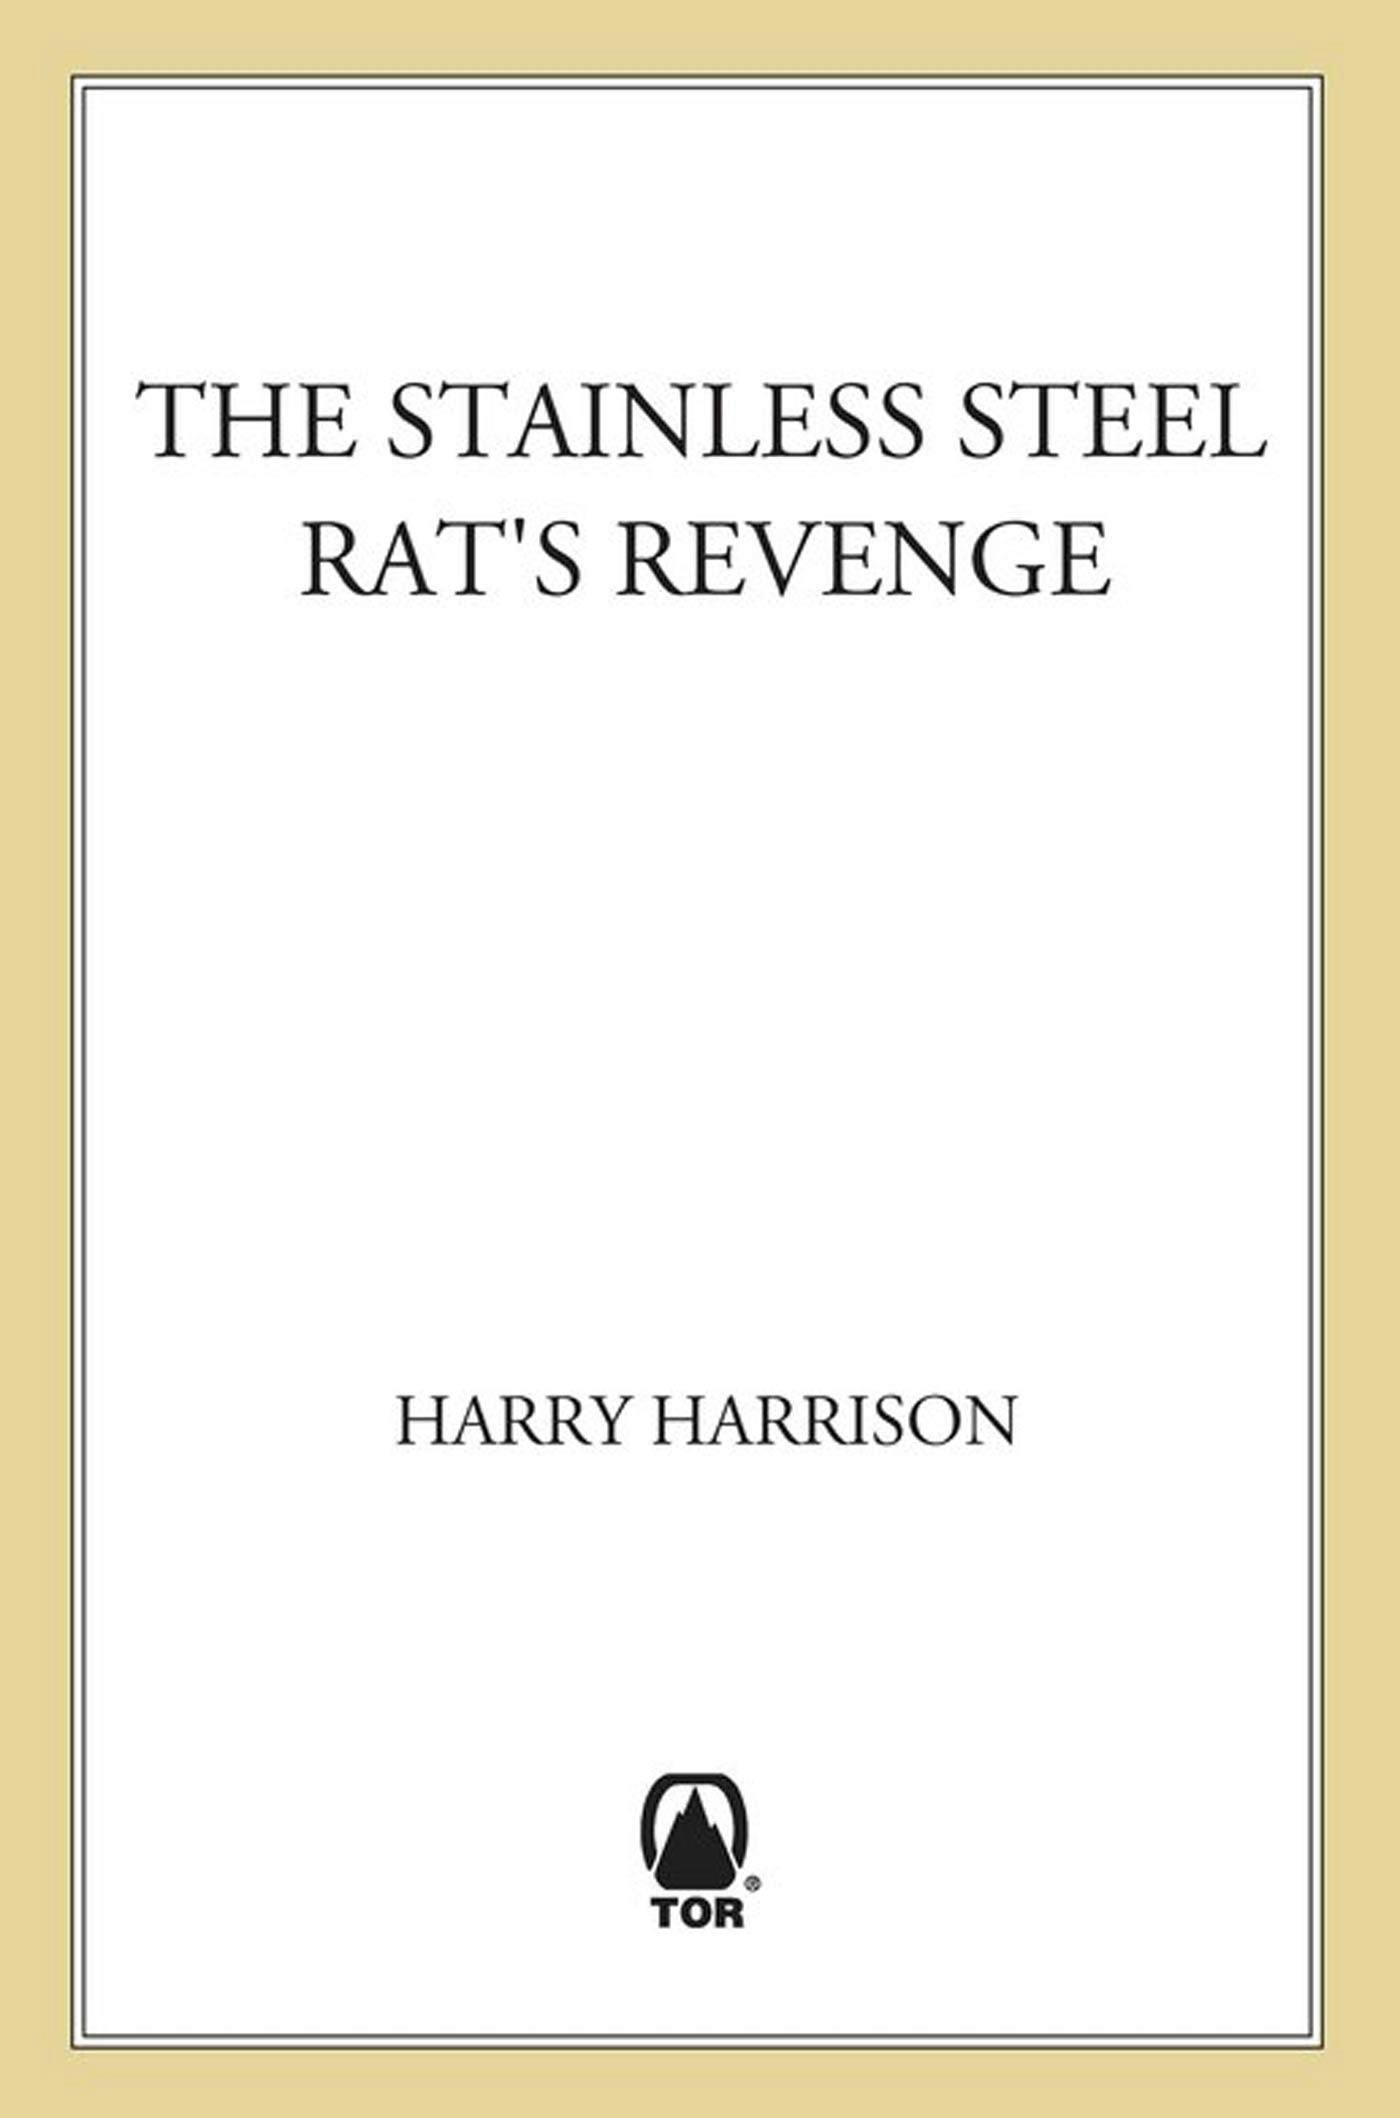 Cover for the book titled as: The Stainless Steel Rat's Revenge